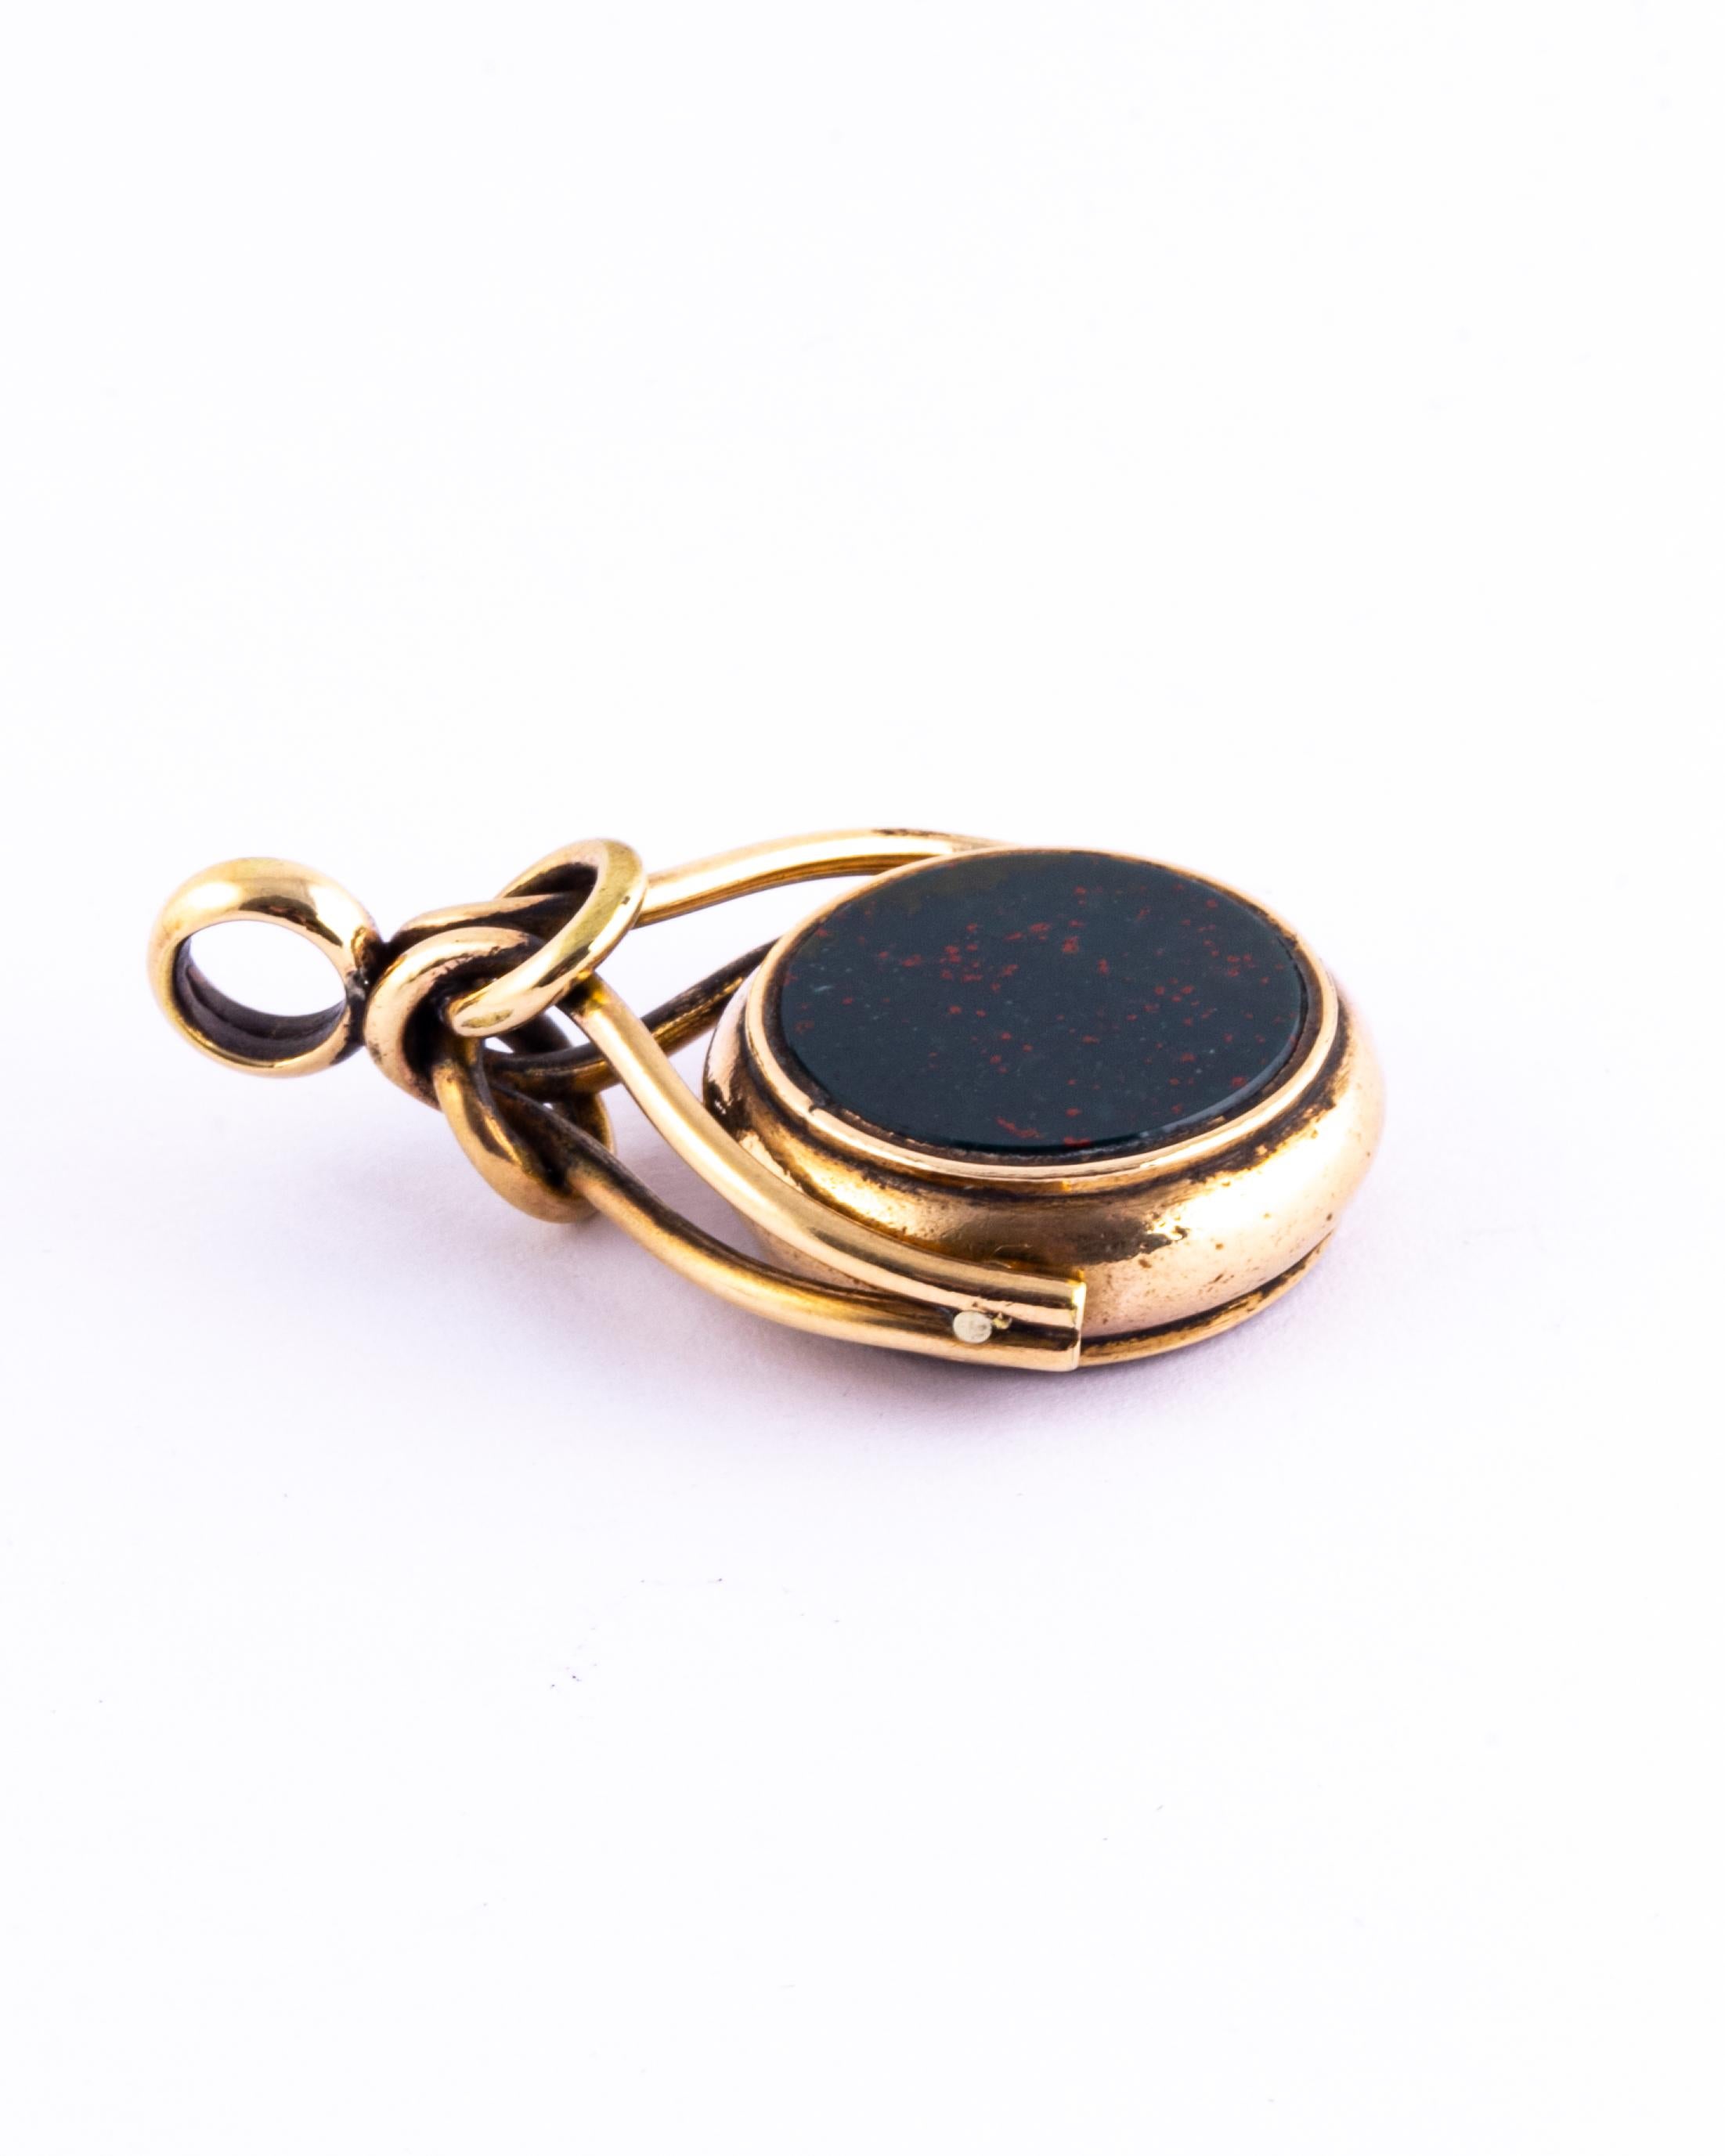 This swivel fob can be used as the perfect pendant. The two stones that are in this fob are held in place with 9ct gold and the loop is modelled in the style of looped cord. These stones are deep rich sardonyx and bloodstone with gorgeous red flecks